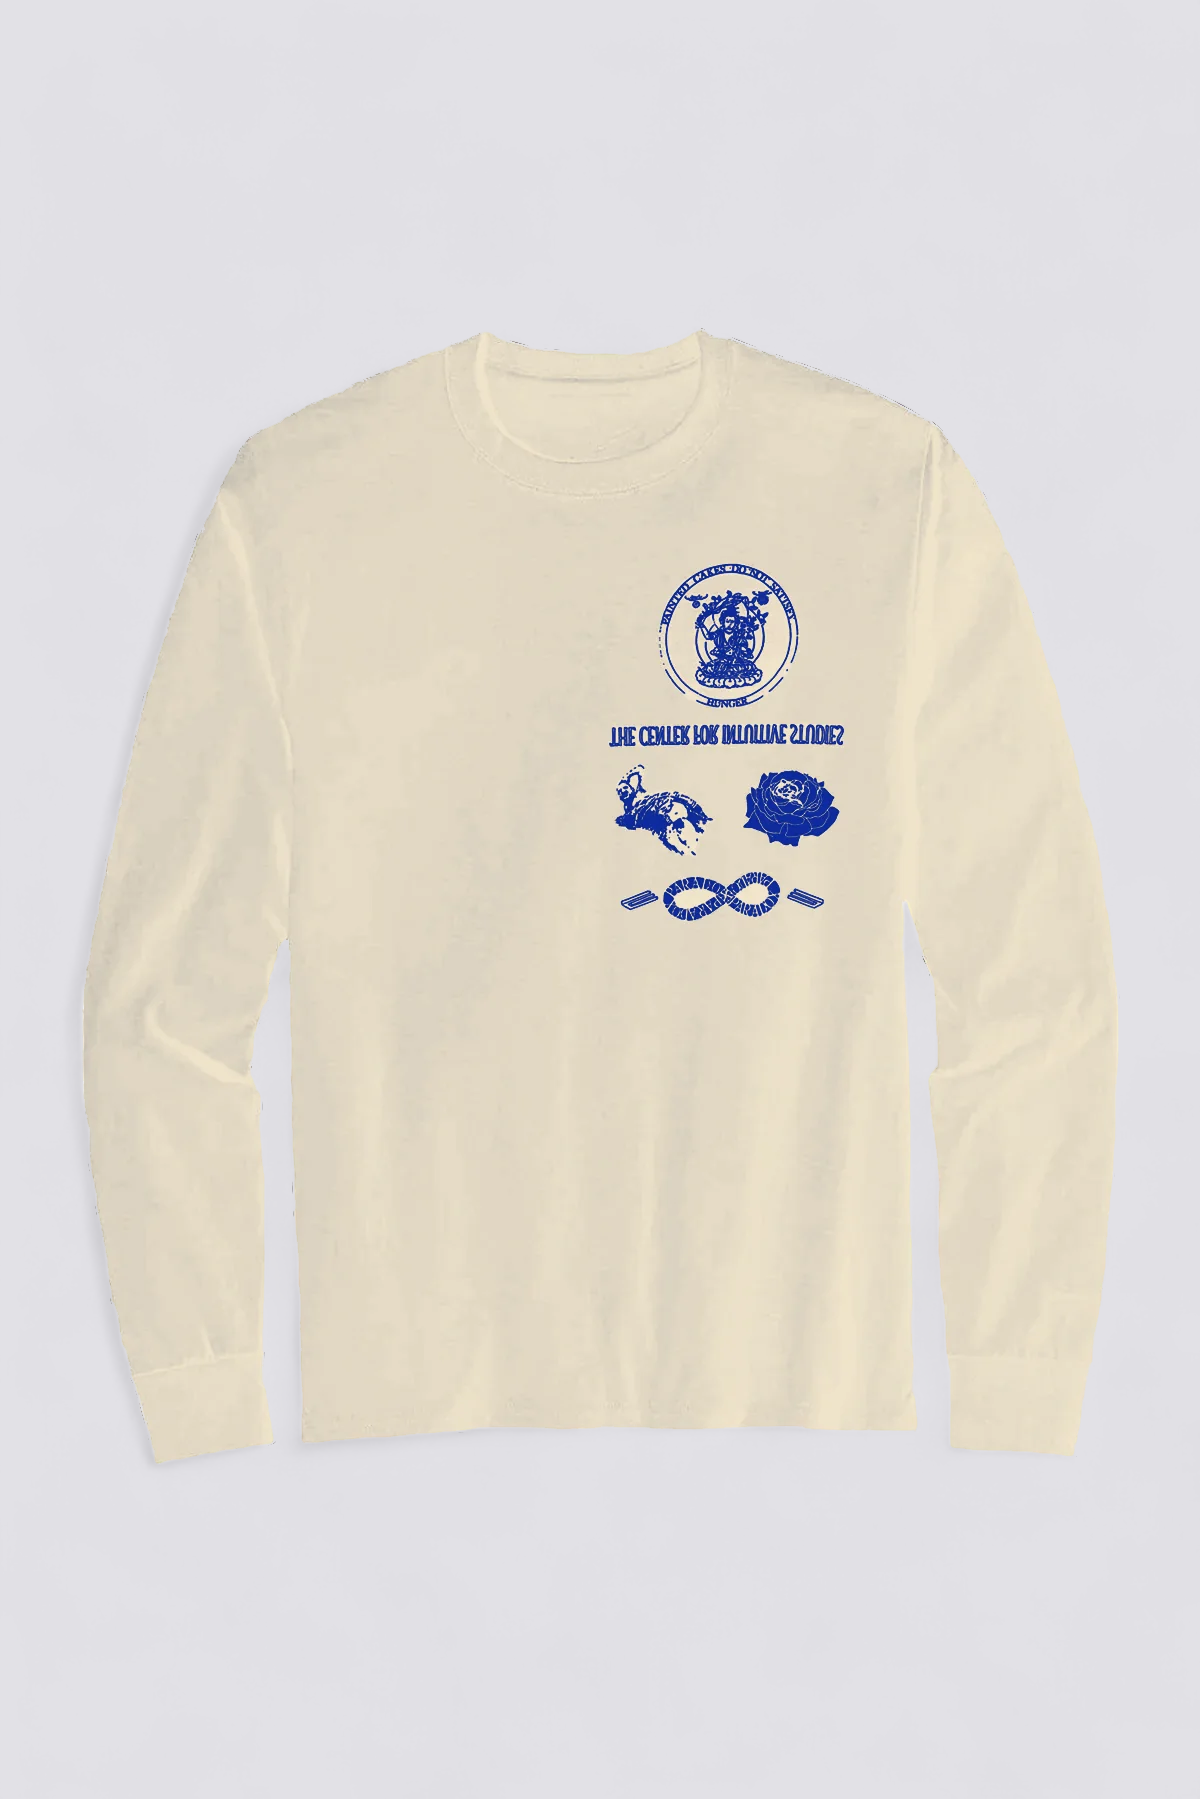 The Center For Intuitive Studies Long Sleeve - Natural/Blue